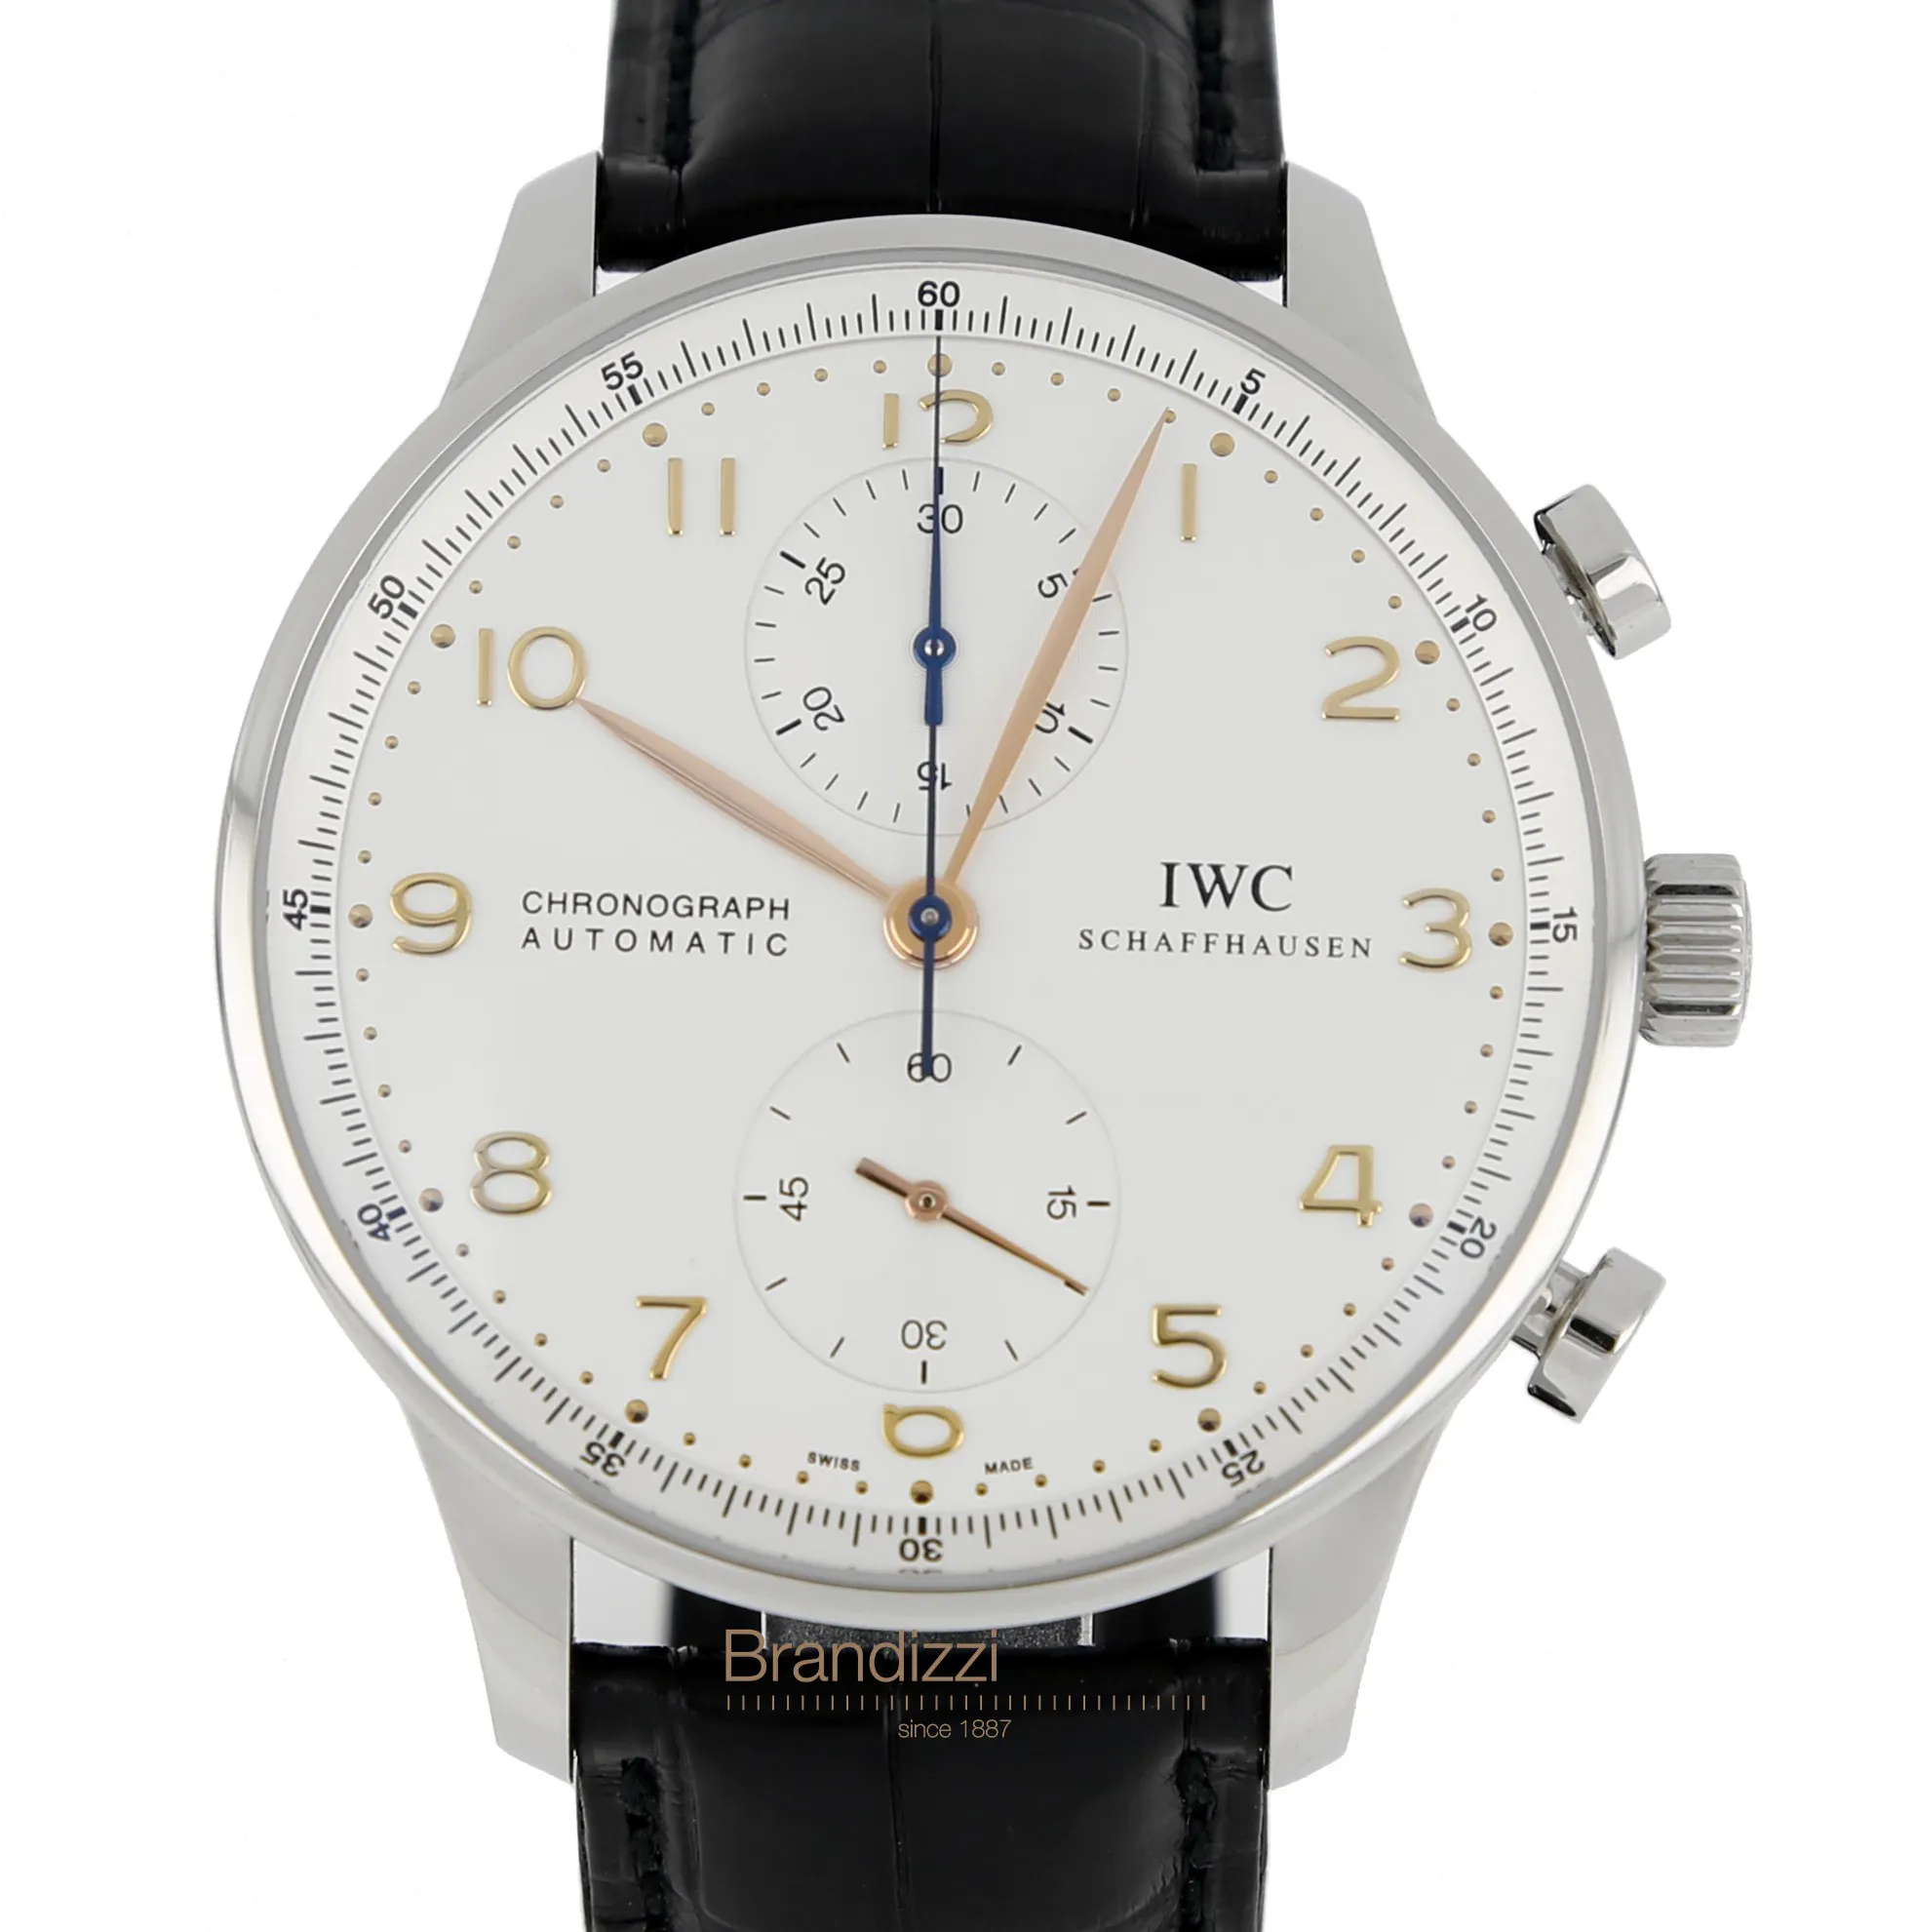 IWC 3714 41mm Stainless steel